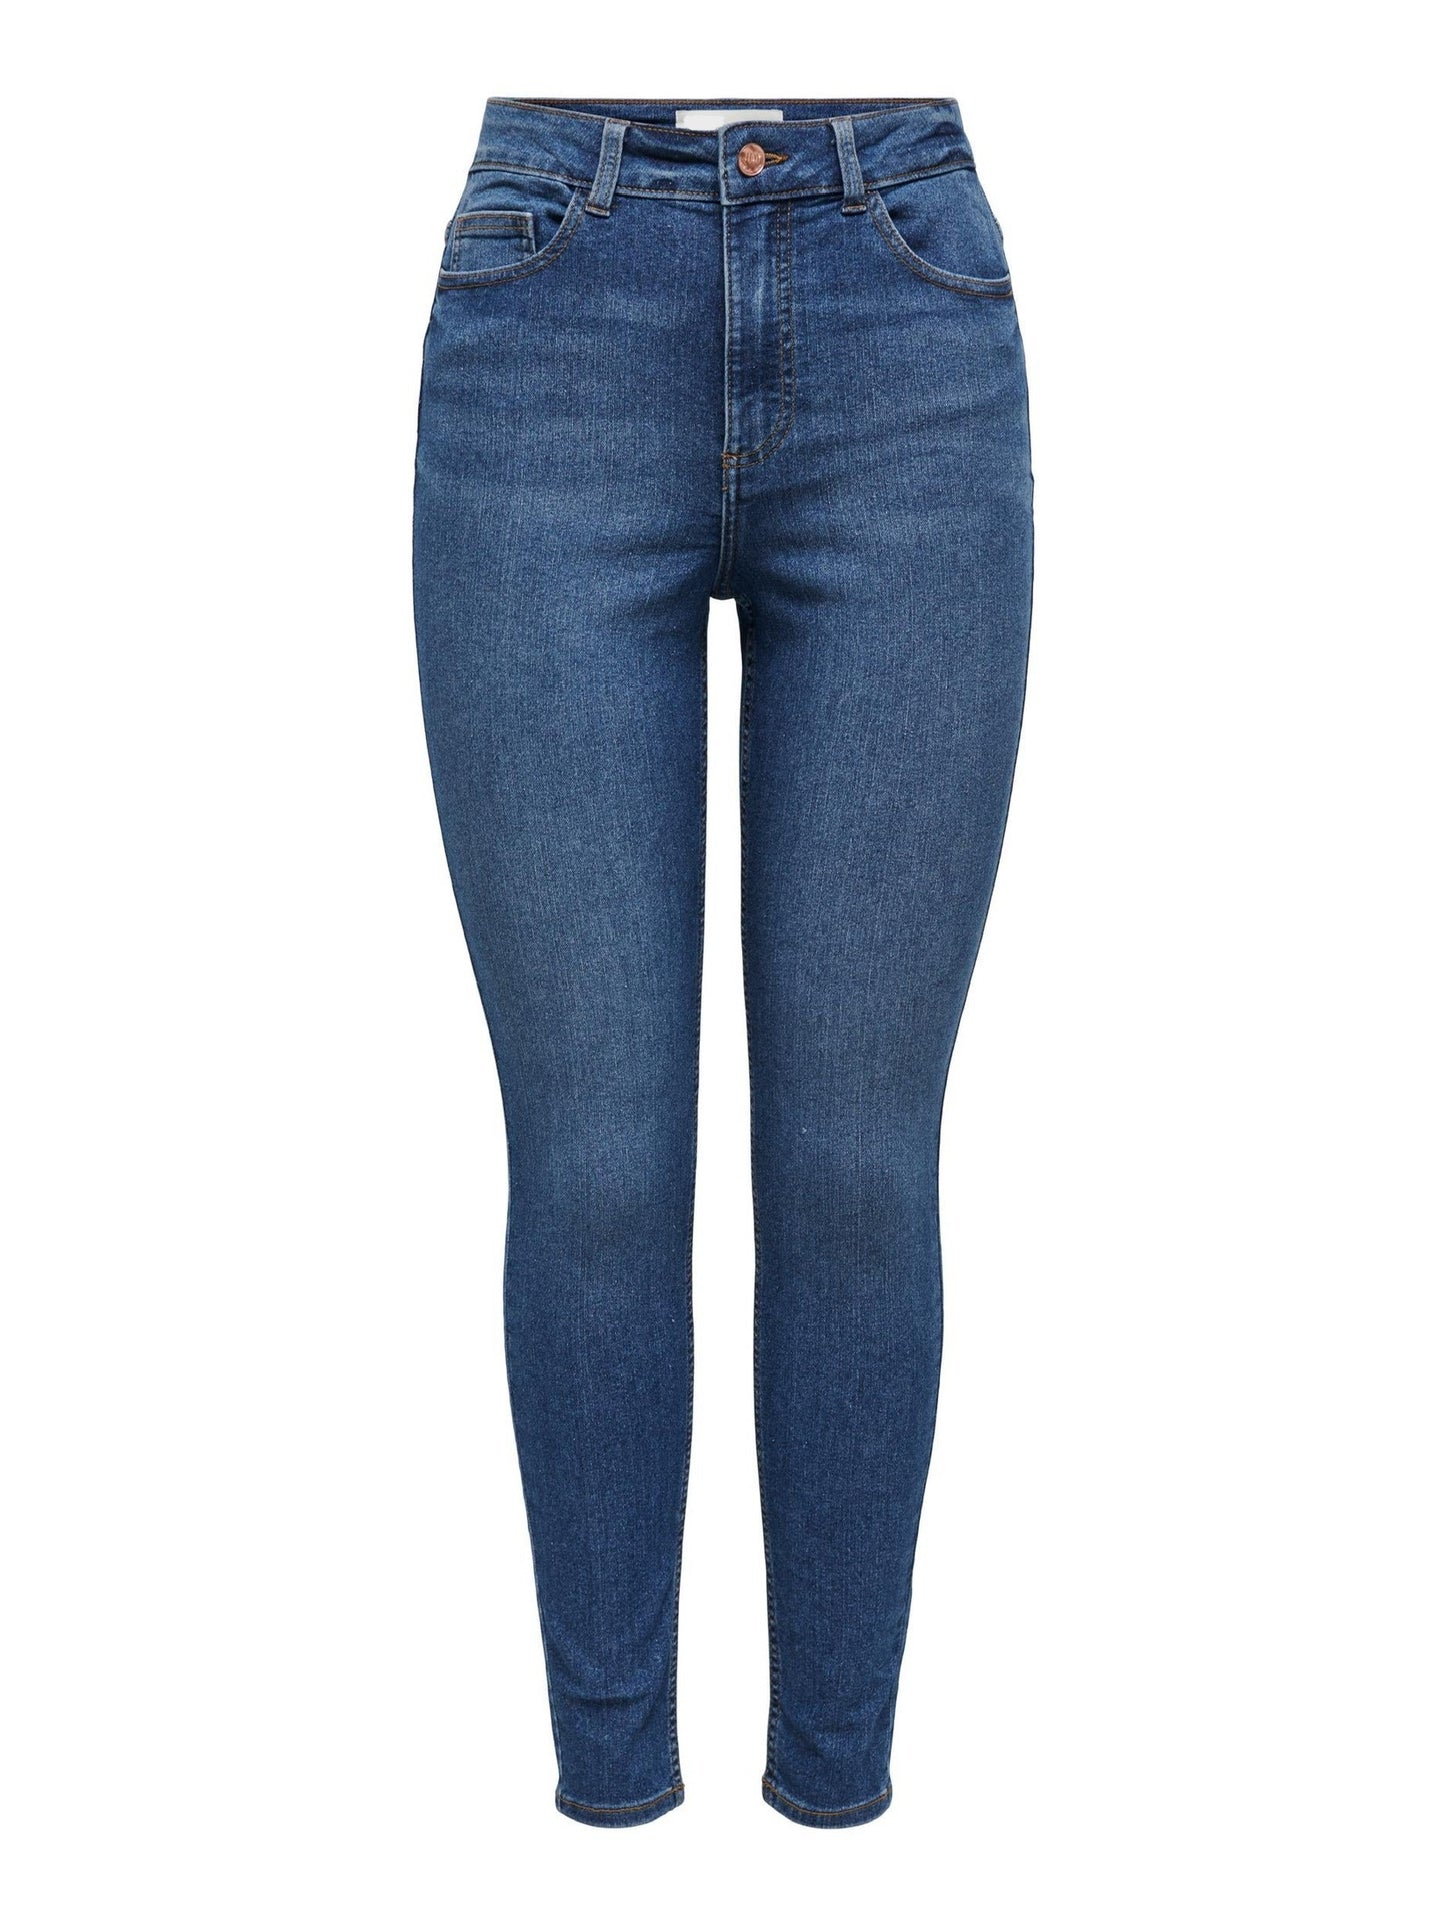 High waisted ankle jeans